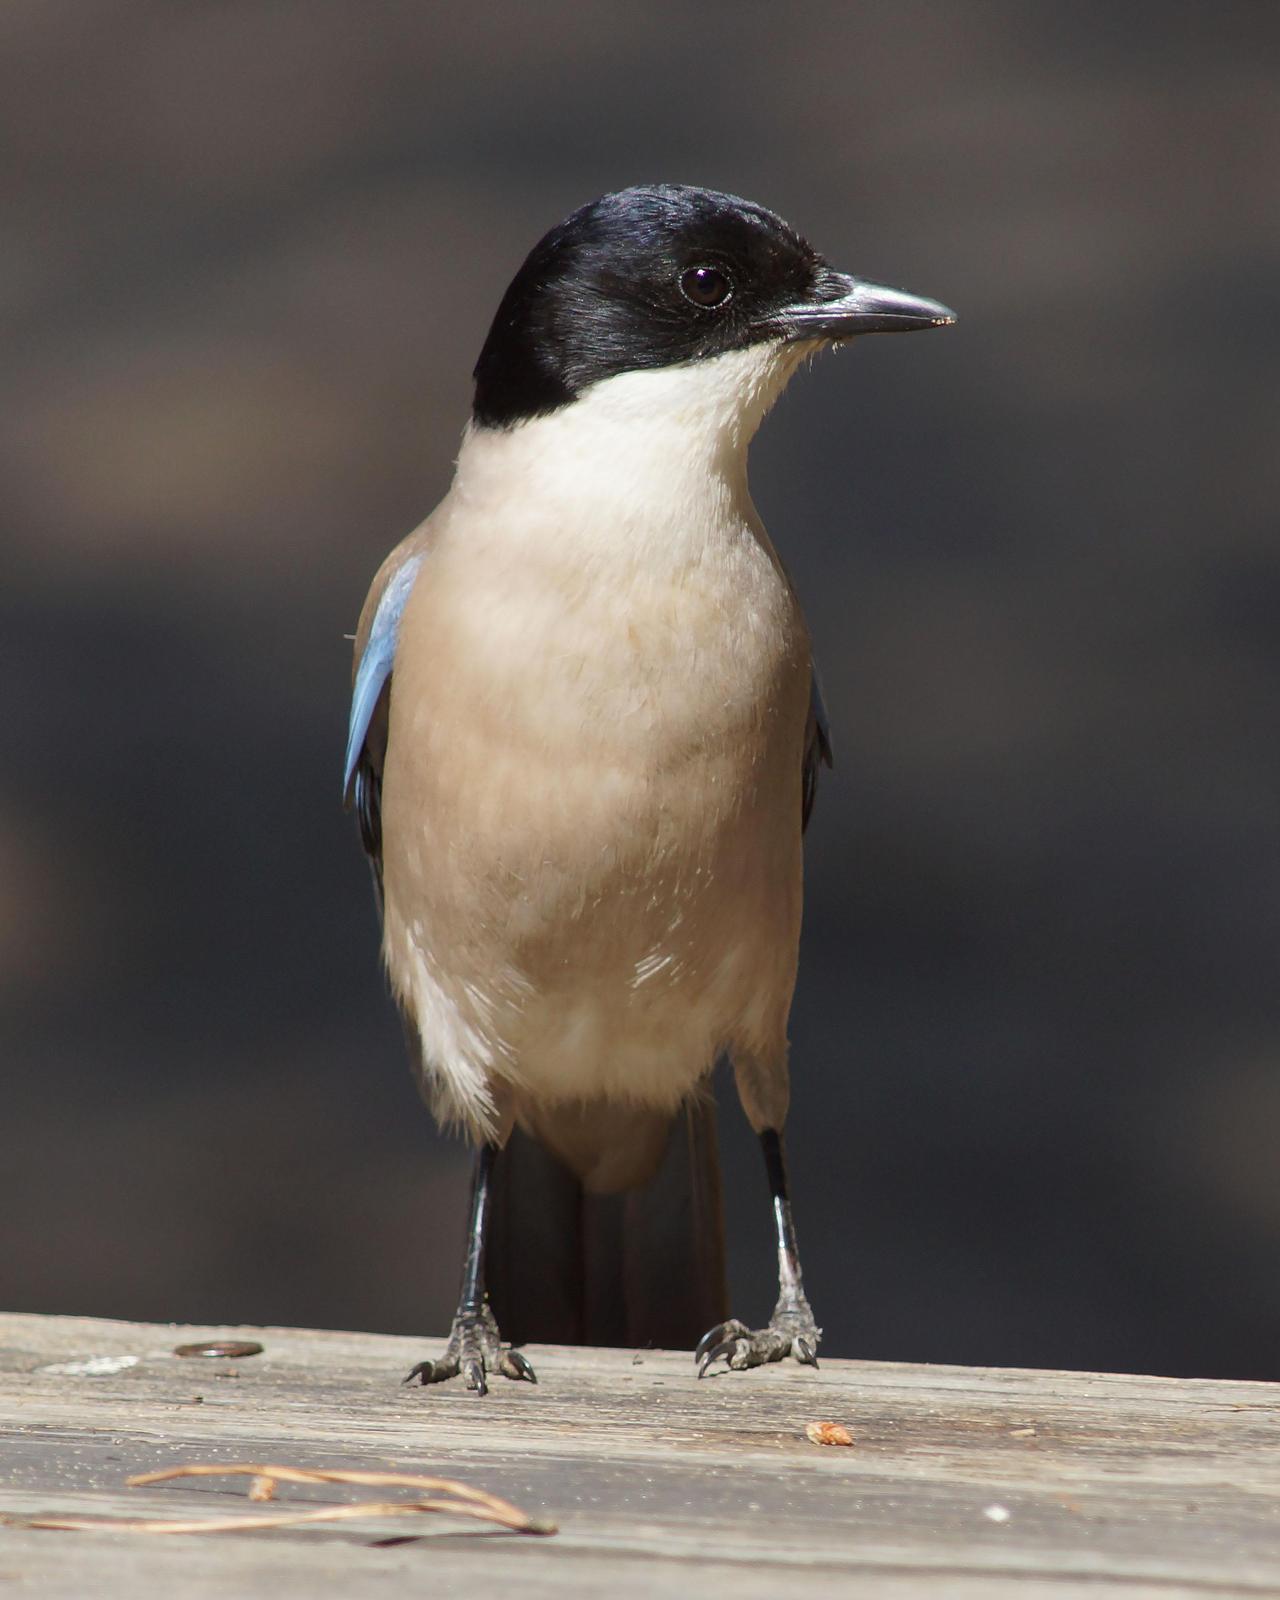 Azure-winged Magpie Photo by Steve Percival